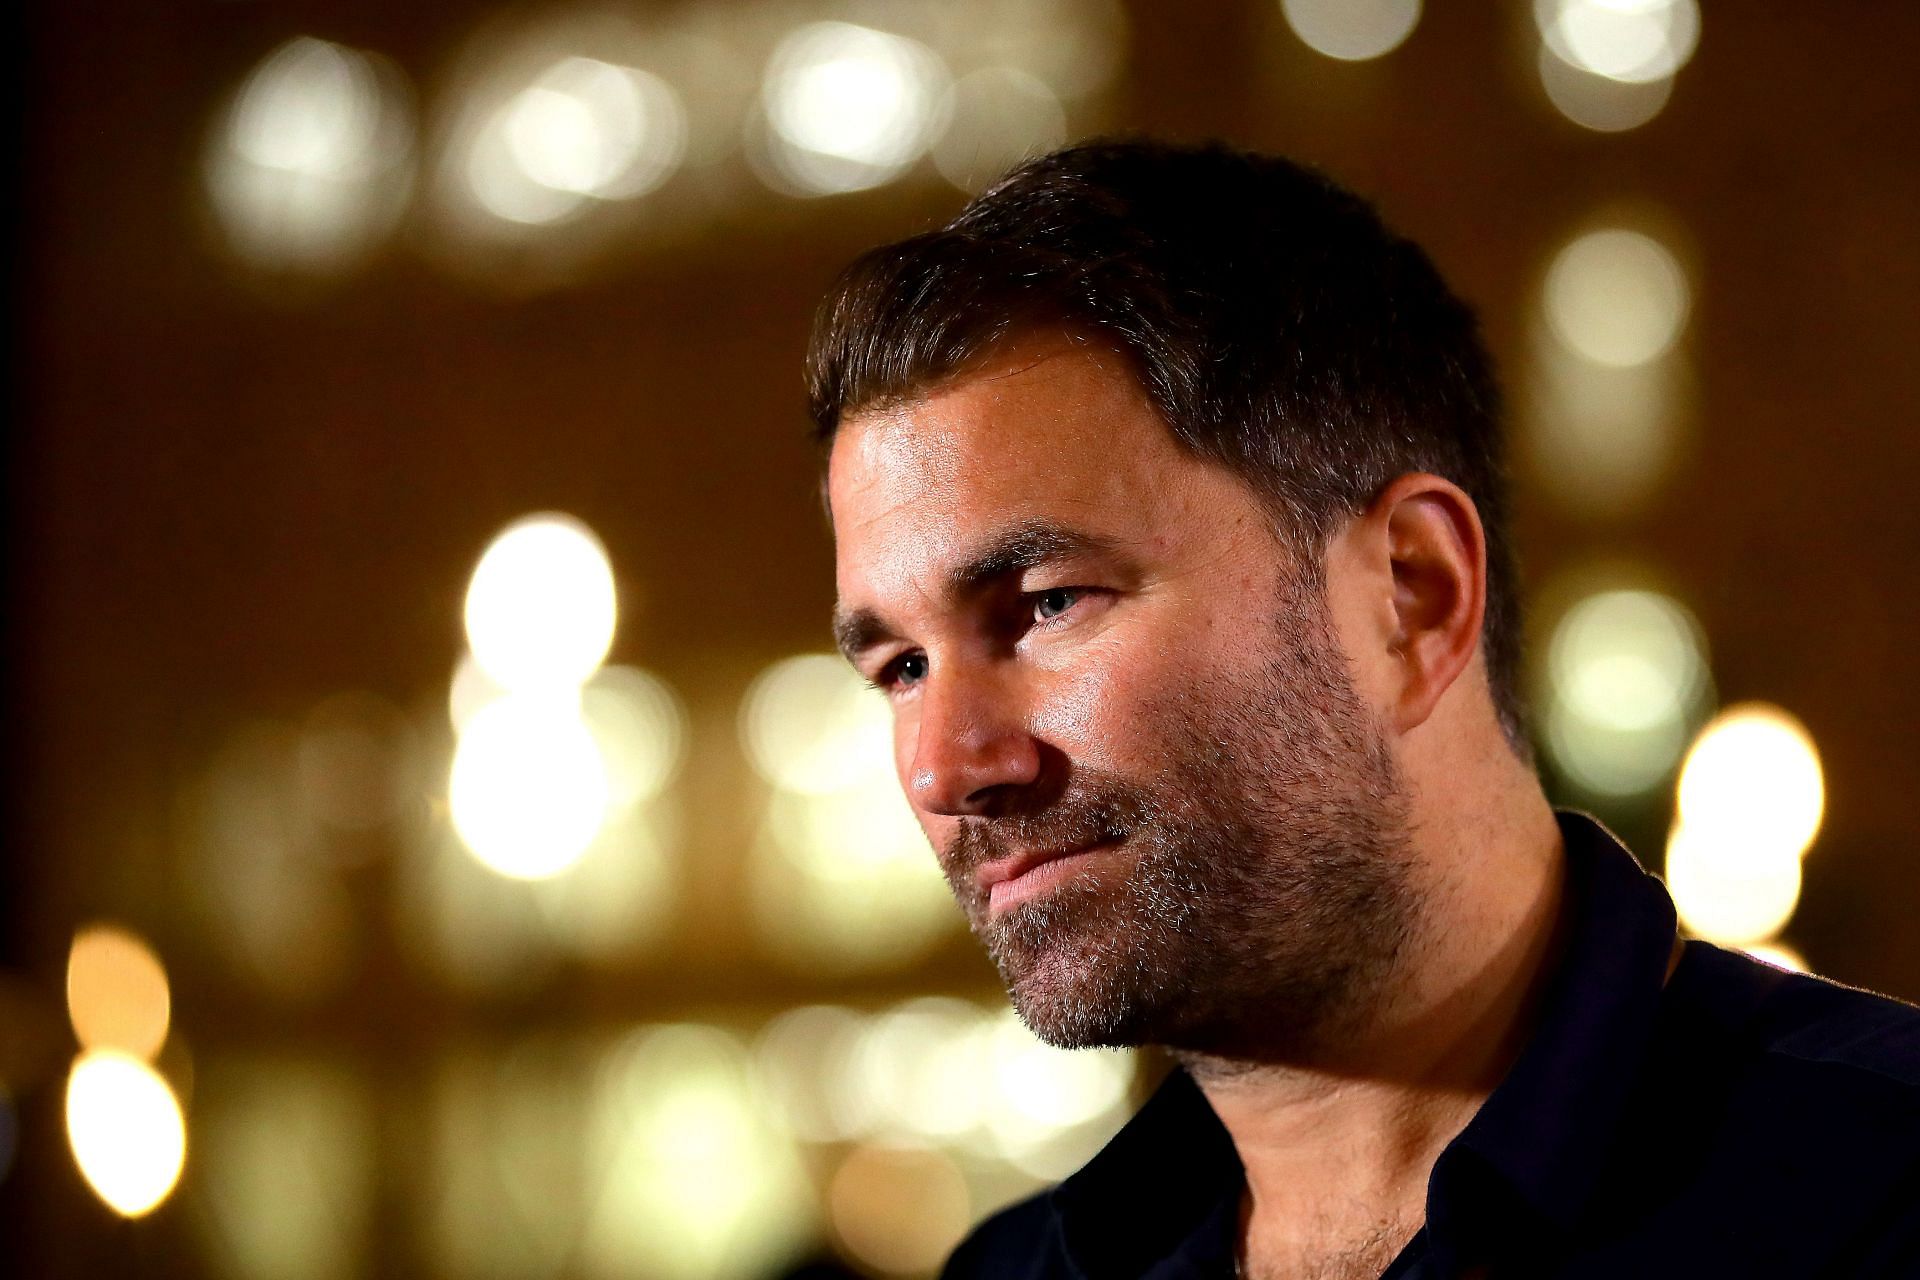 Eddie Hearn has given his take on holding fights in Saudi Arabia.